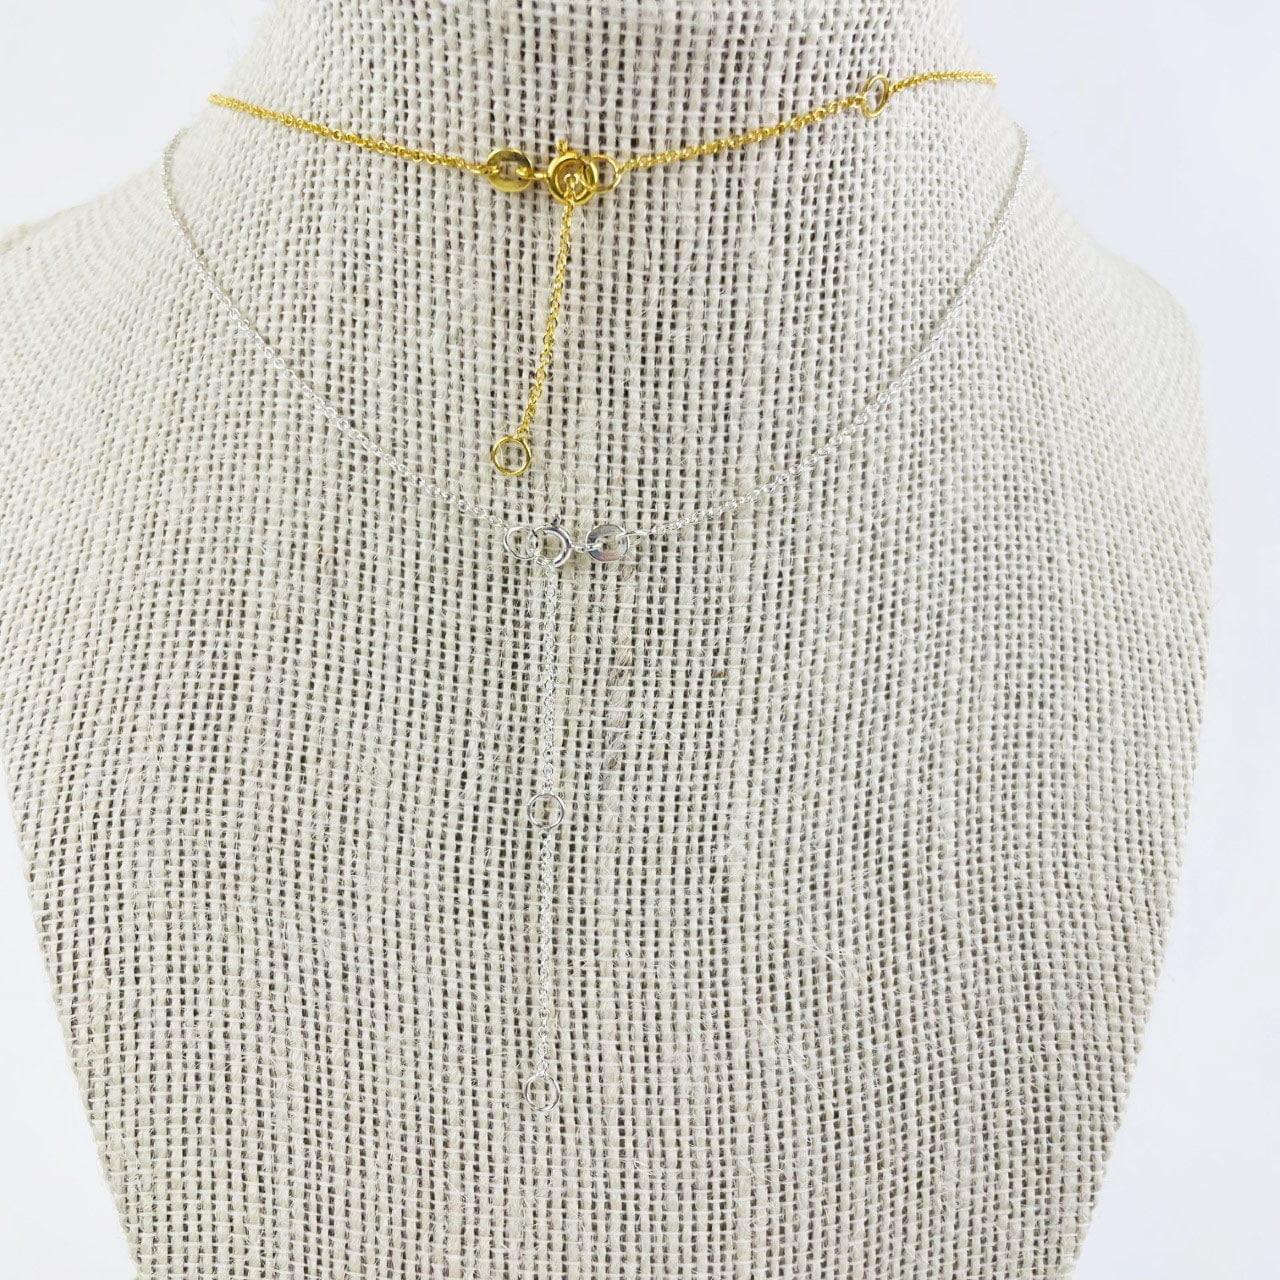 Gold and Silver necklaces with clasps from back